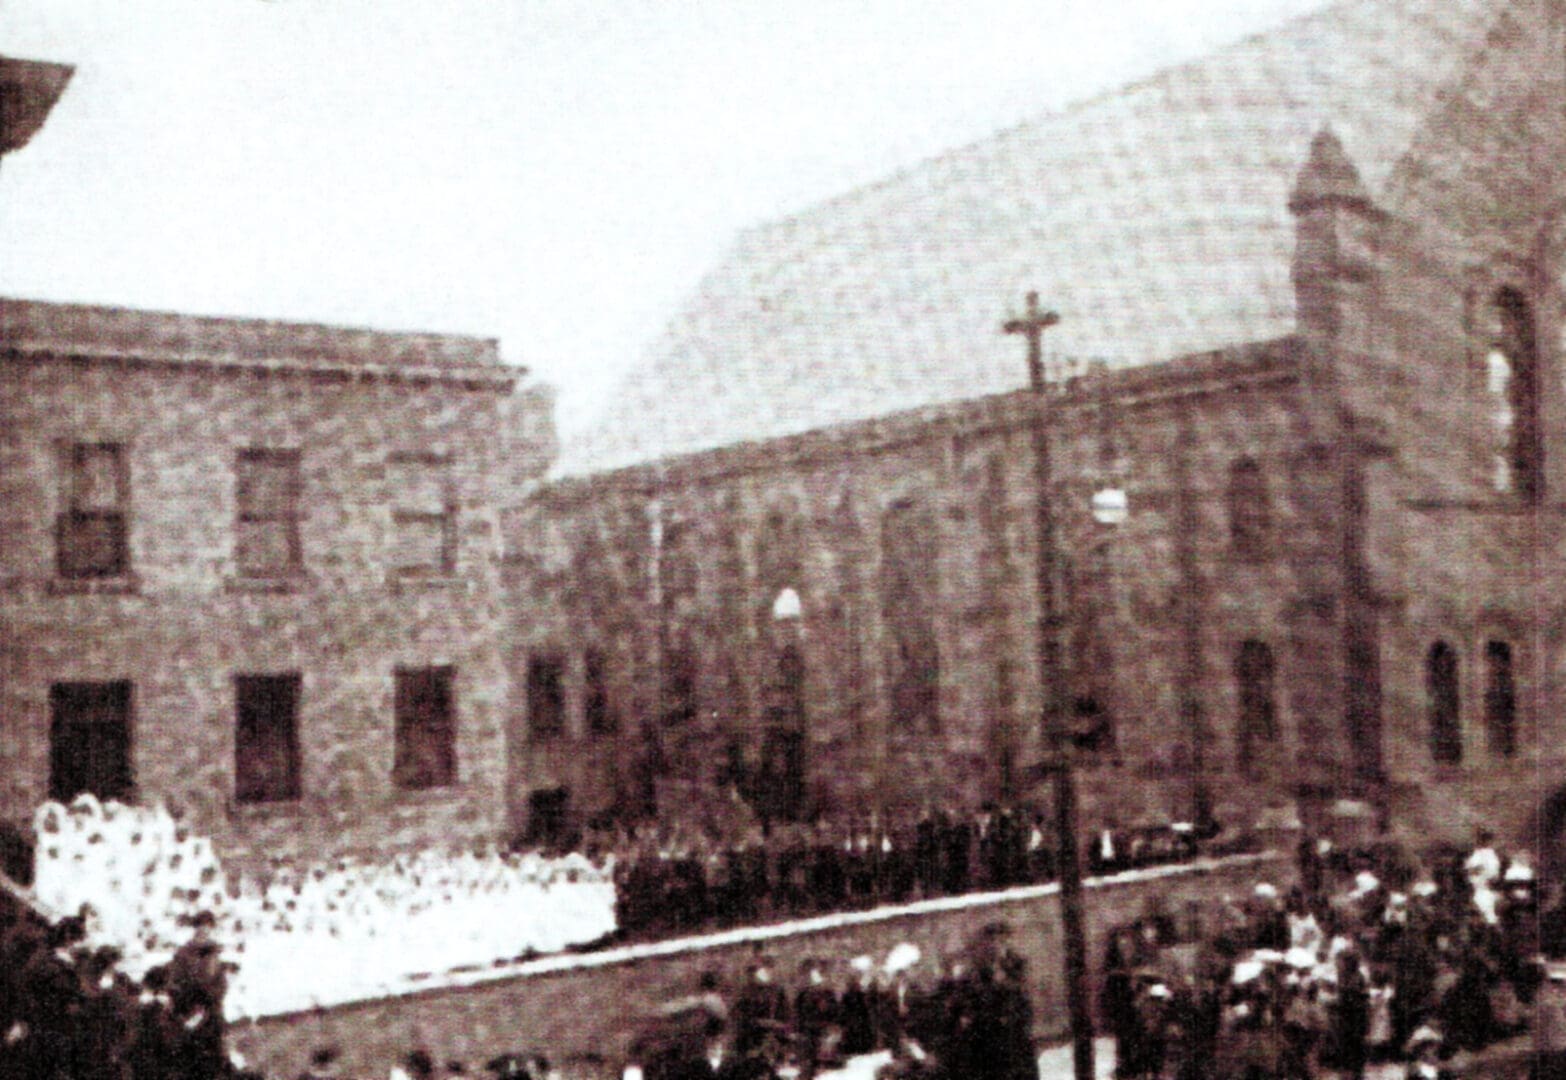 A crowd of people standing in front of a building.